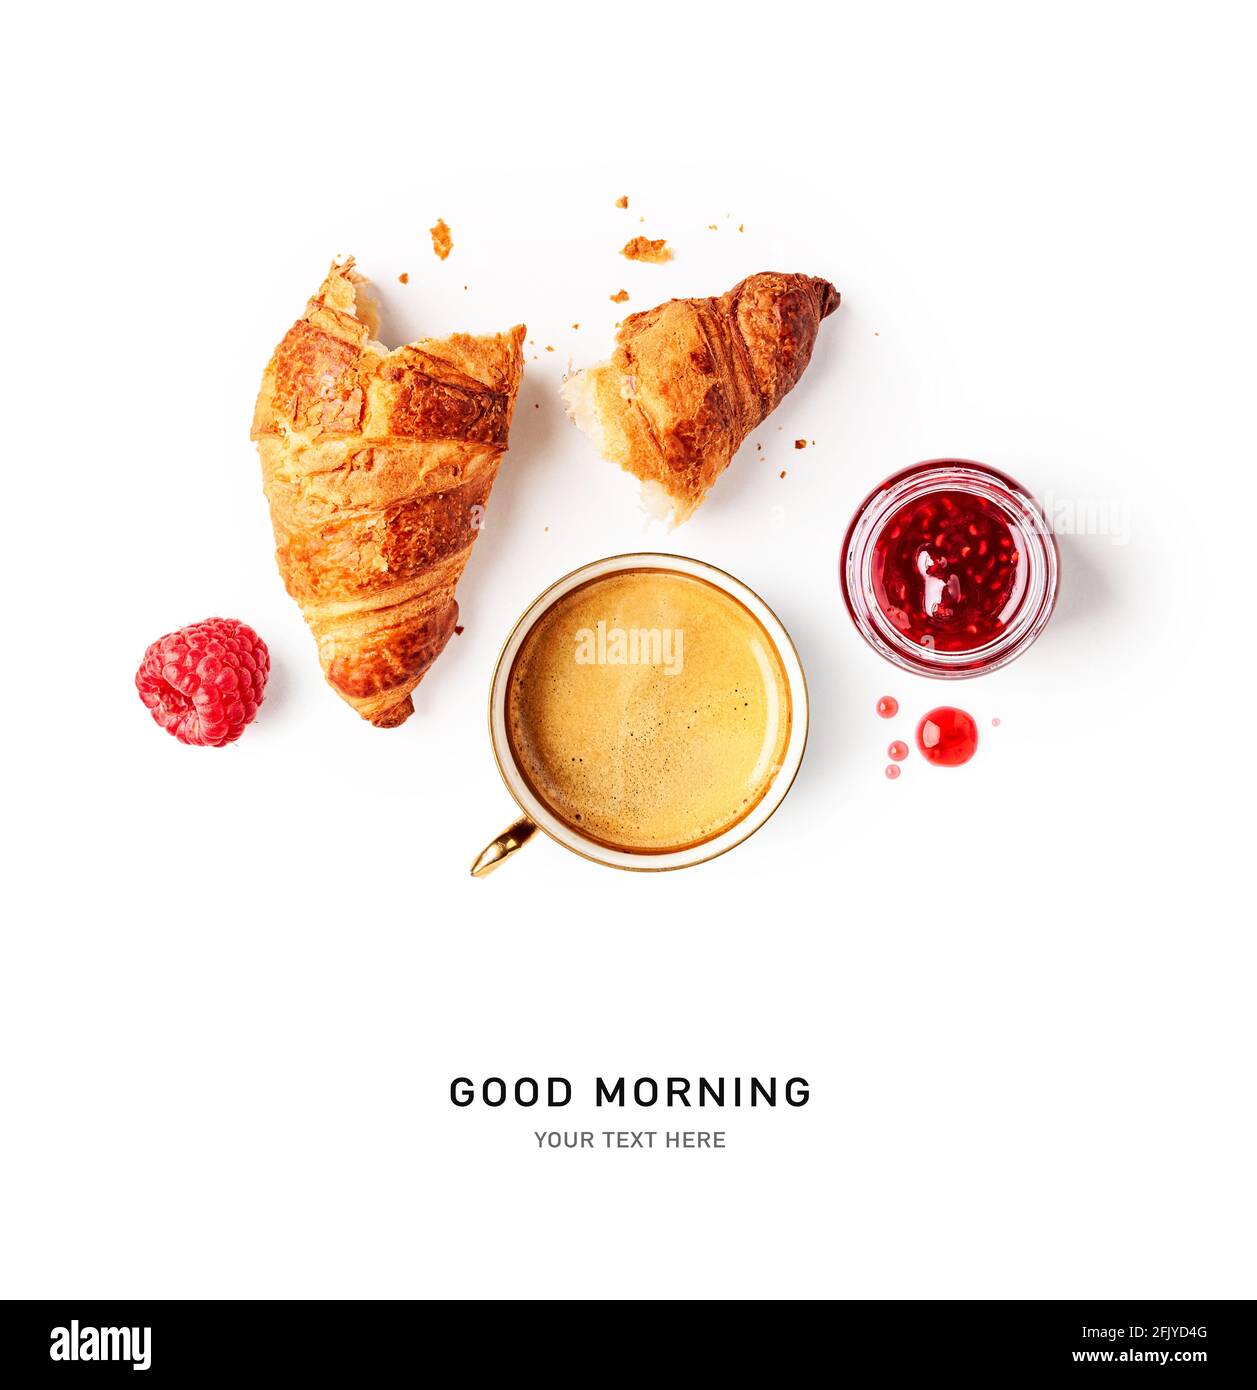 Coffee cup, fresh croissant and raspberry jam creative layout on ...